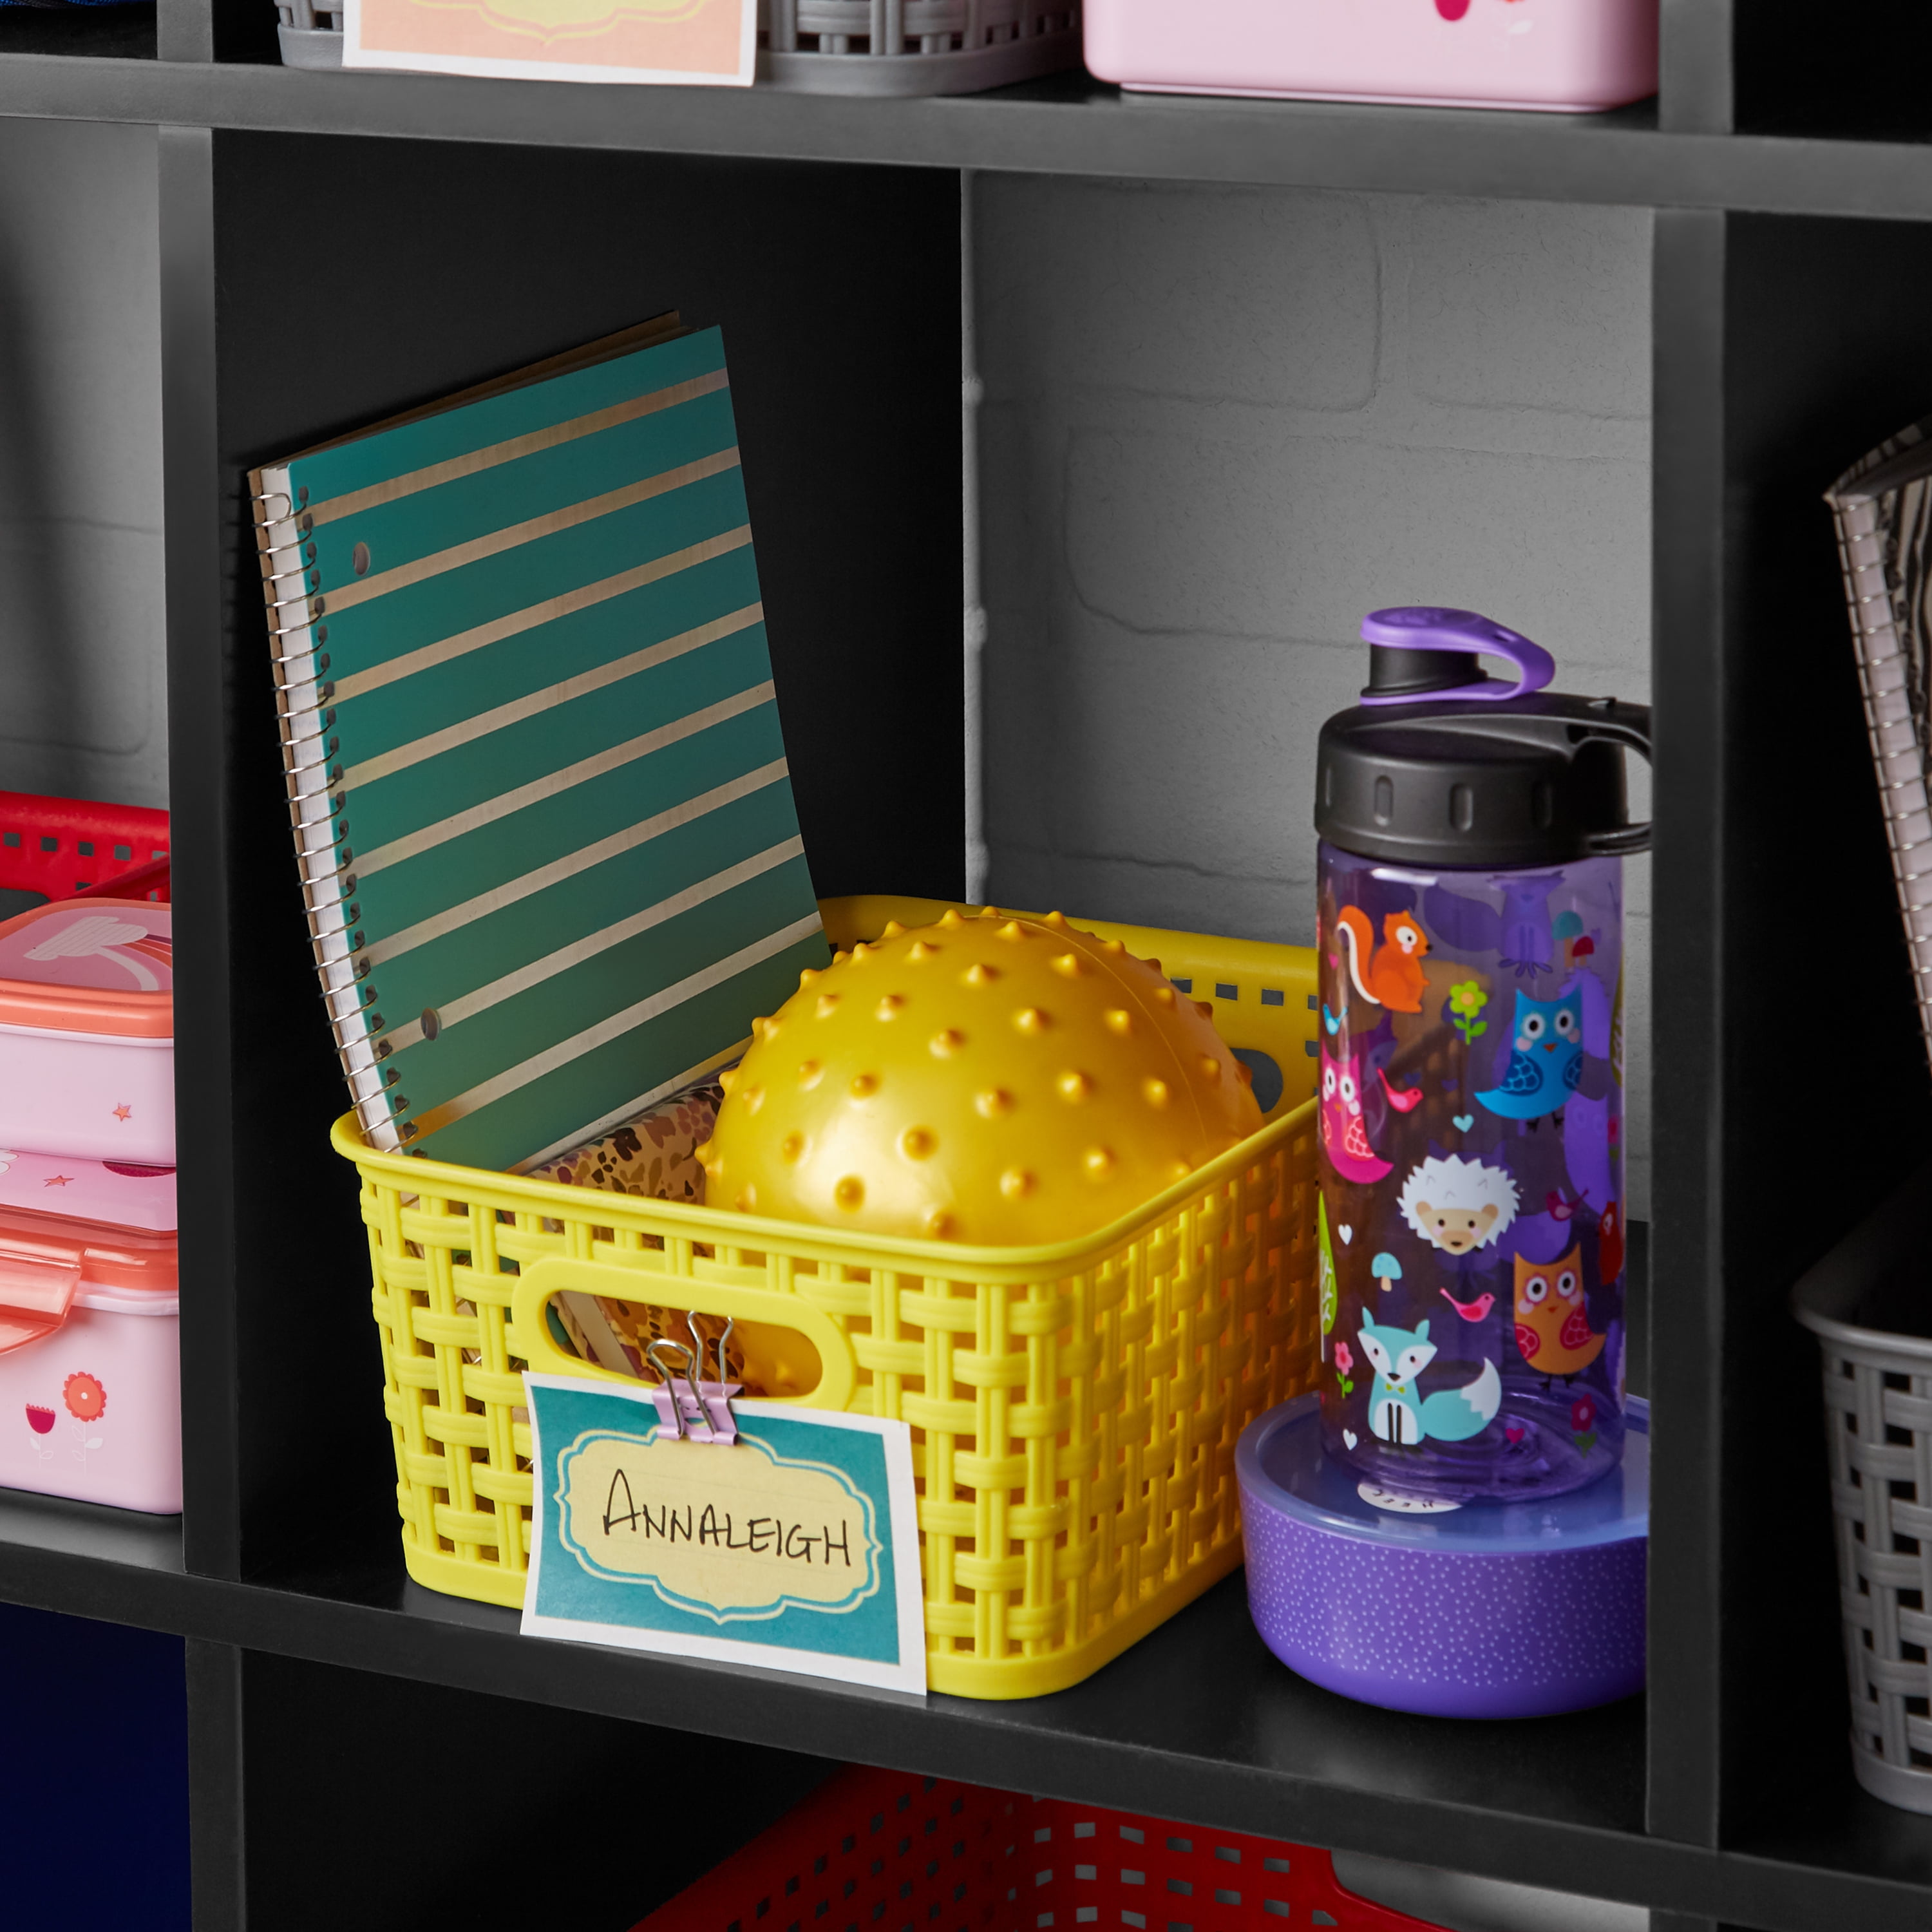 25 Game-Changing Products for the Home Organizer